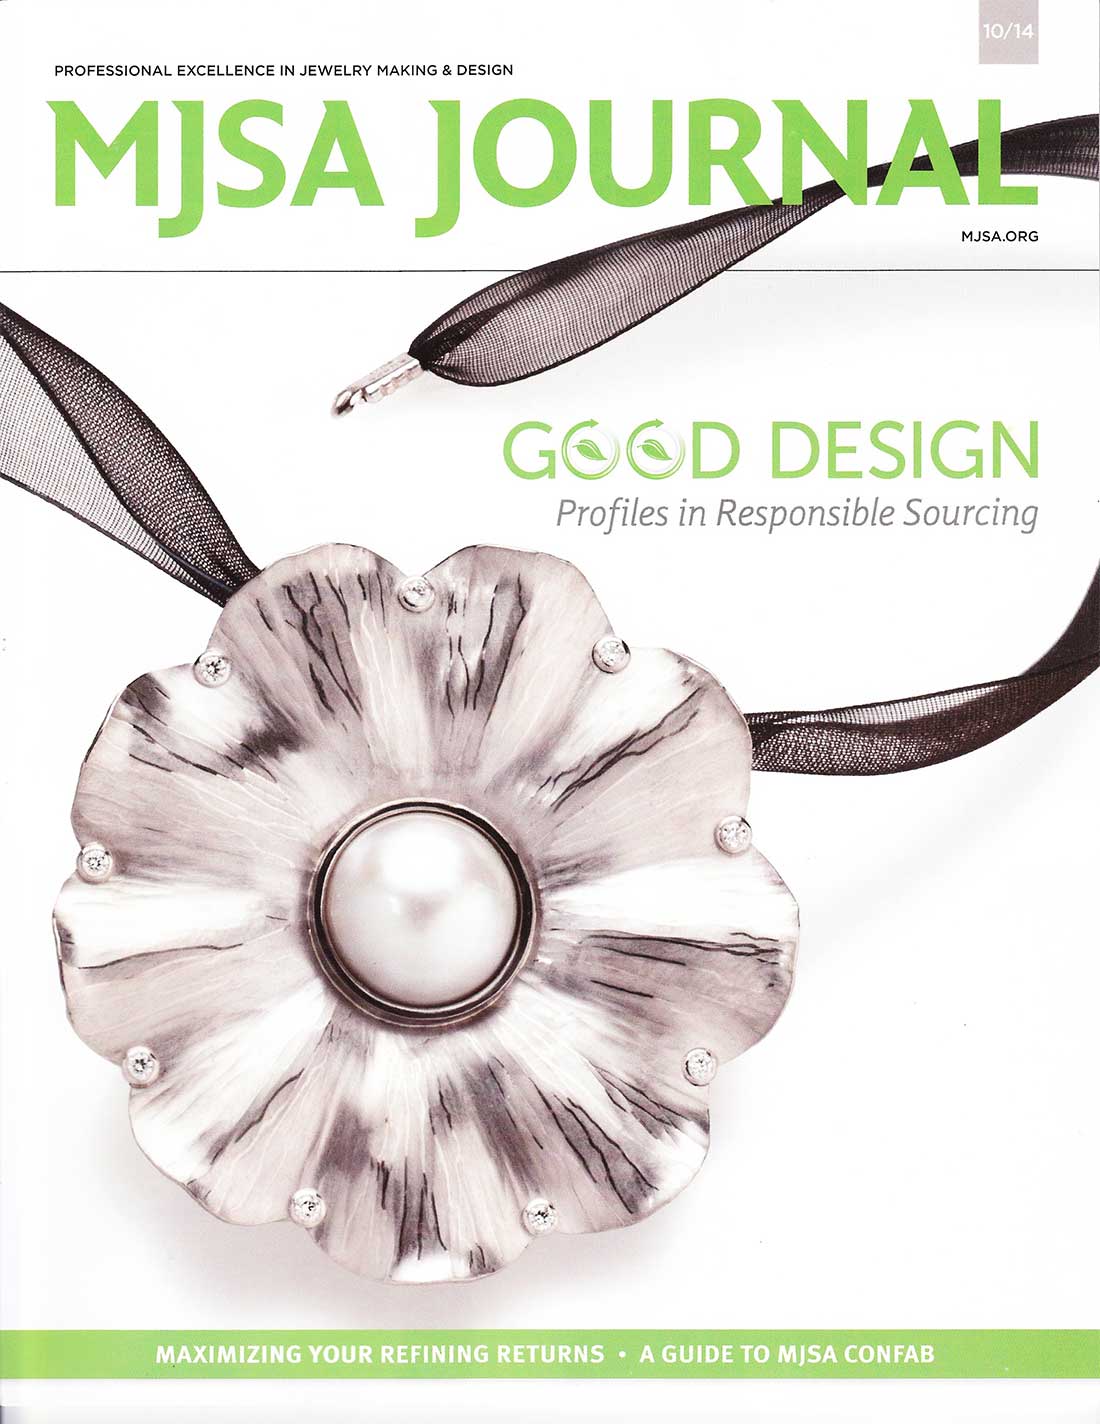 MJSA Cover 10/14